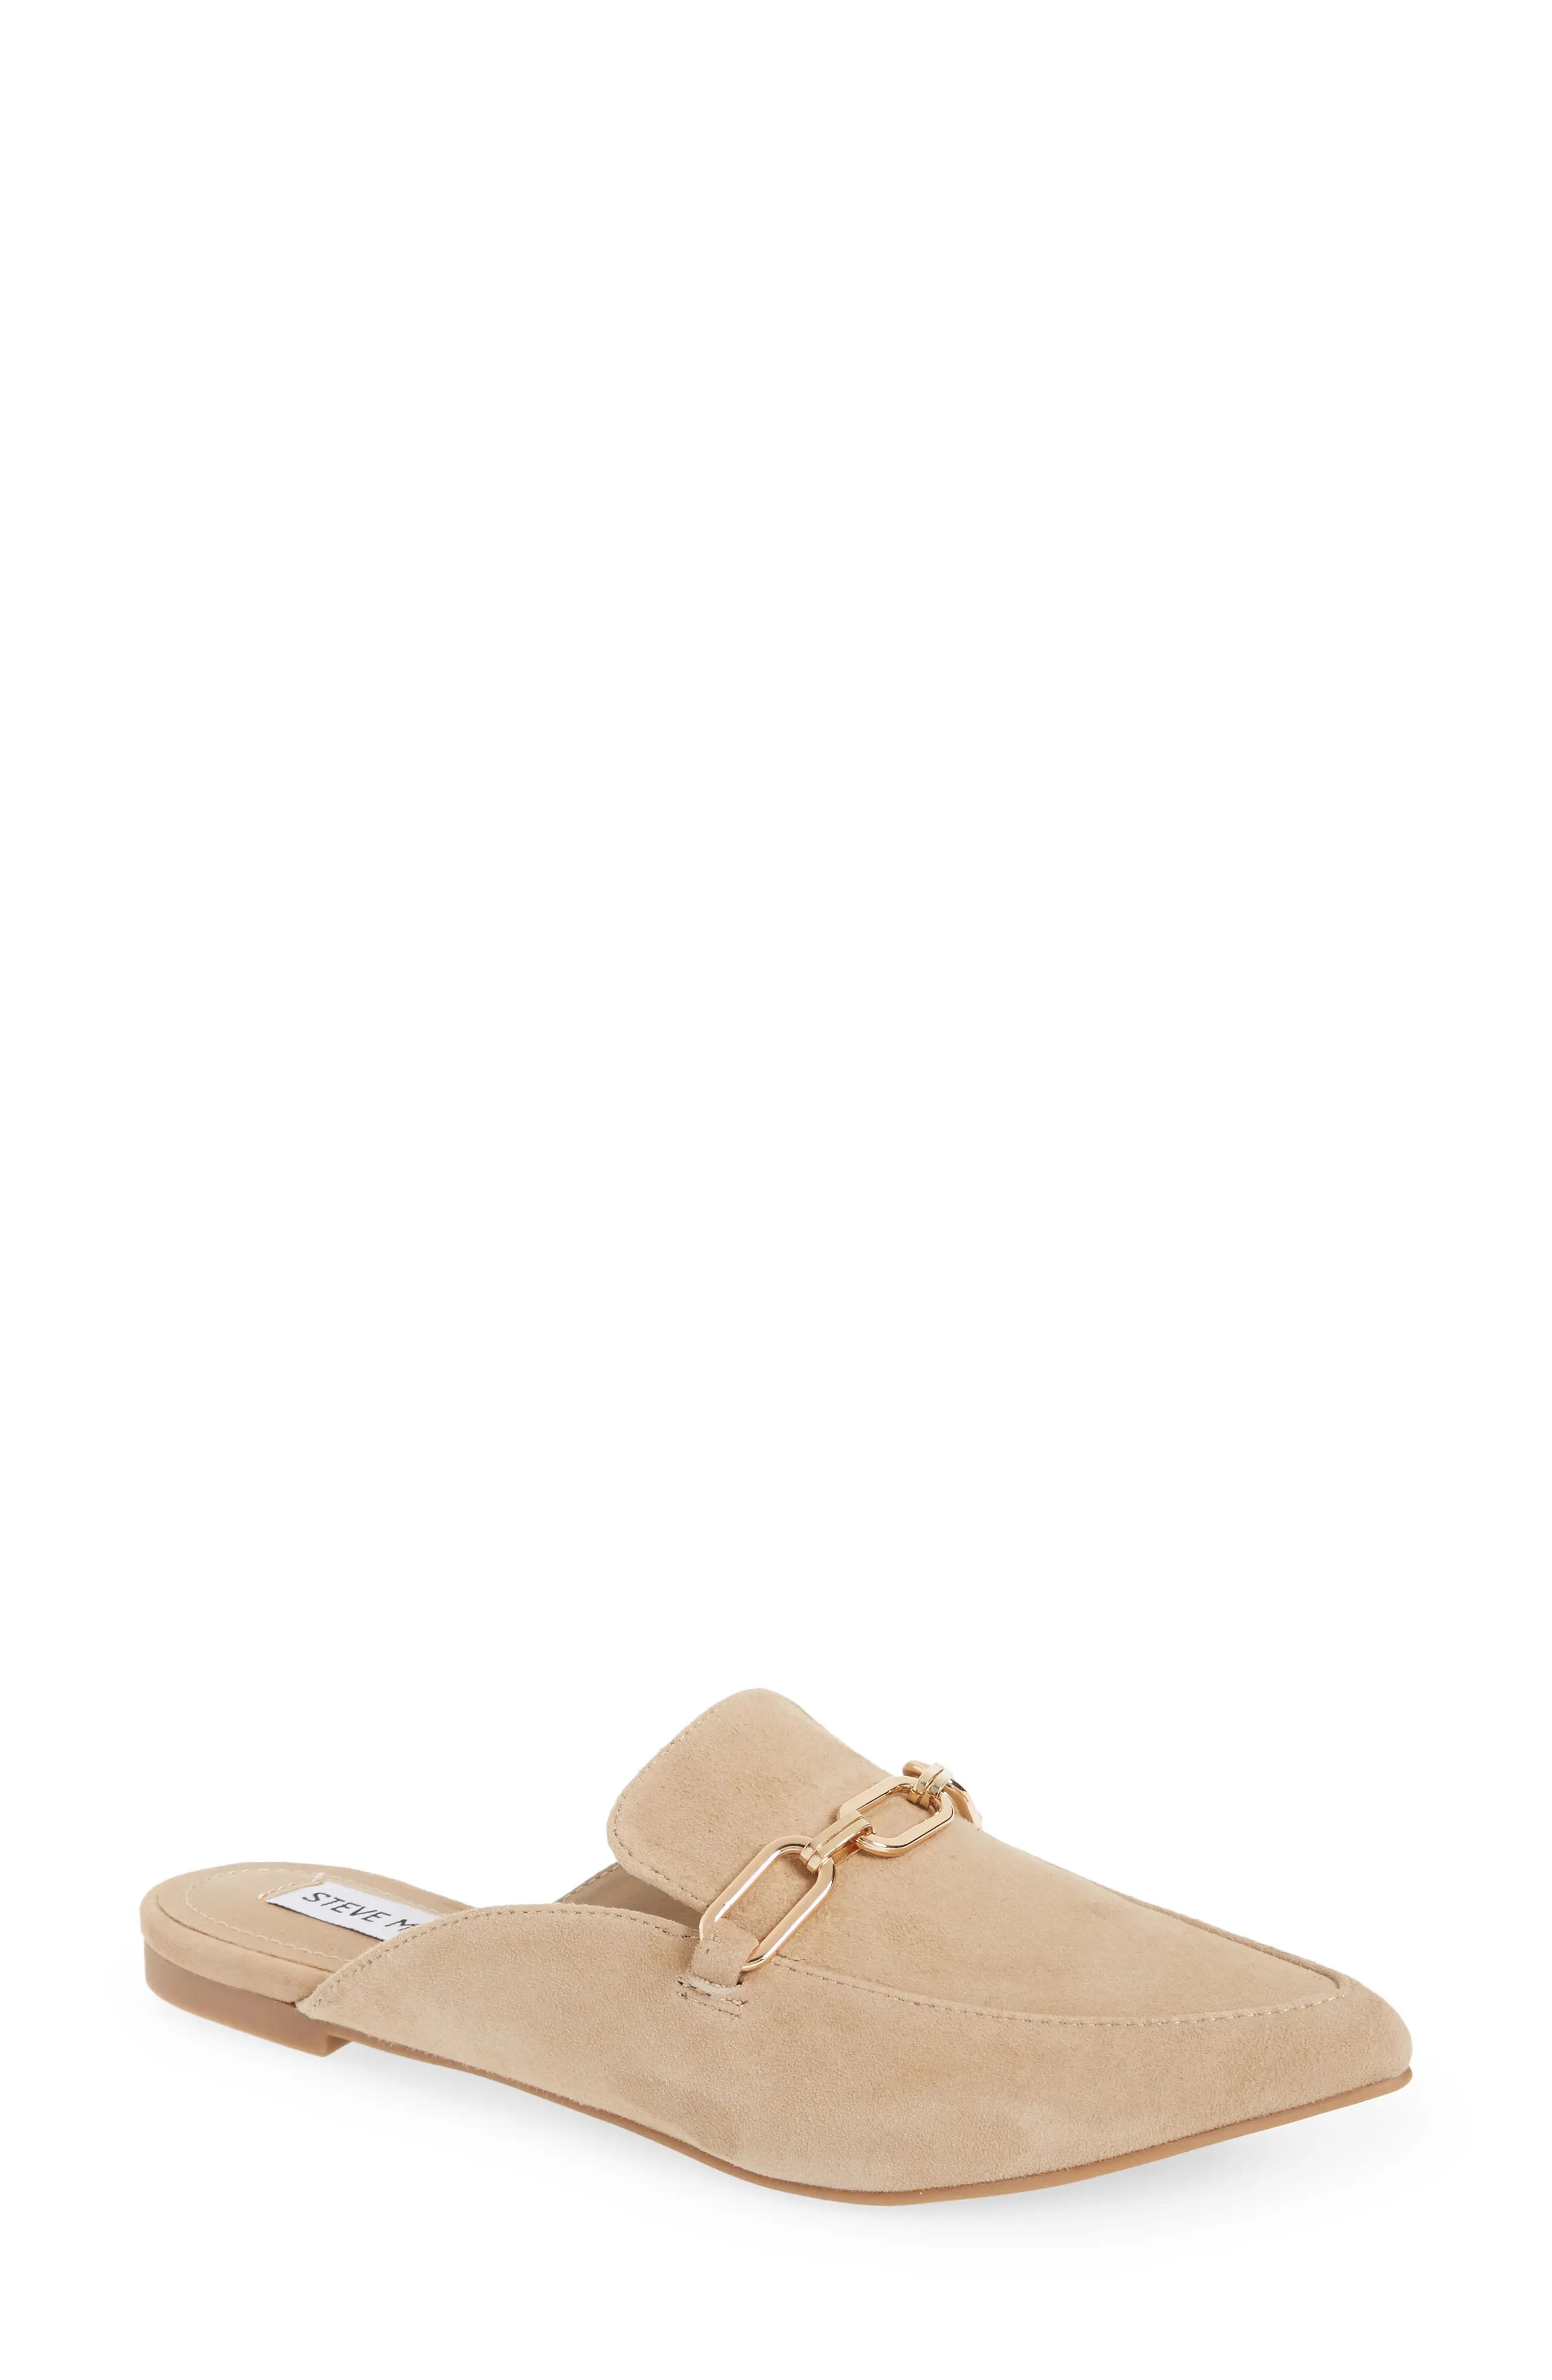 Steve Madden Faraway Chain Mule in Tan Suede at Nordstrom, Size 6 | Nordstrom